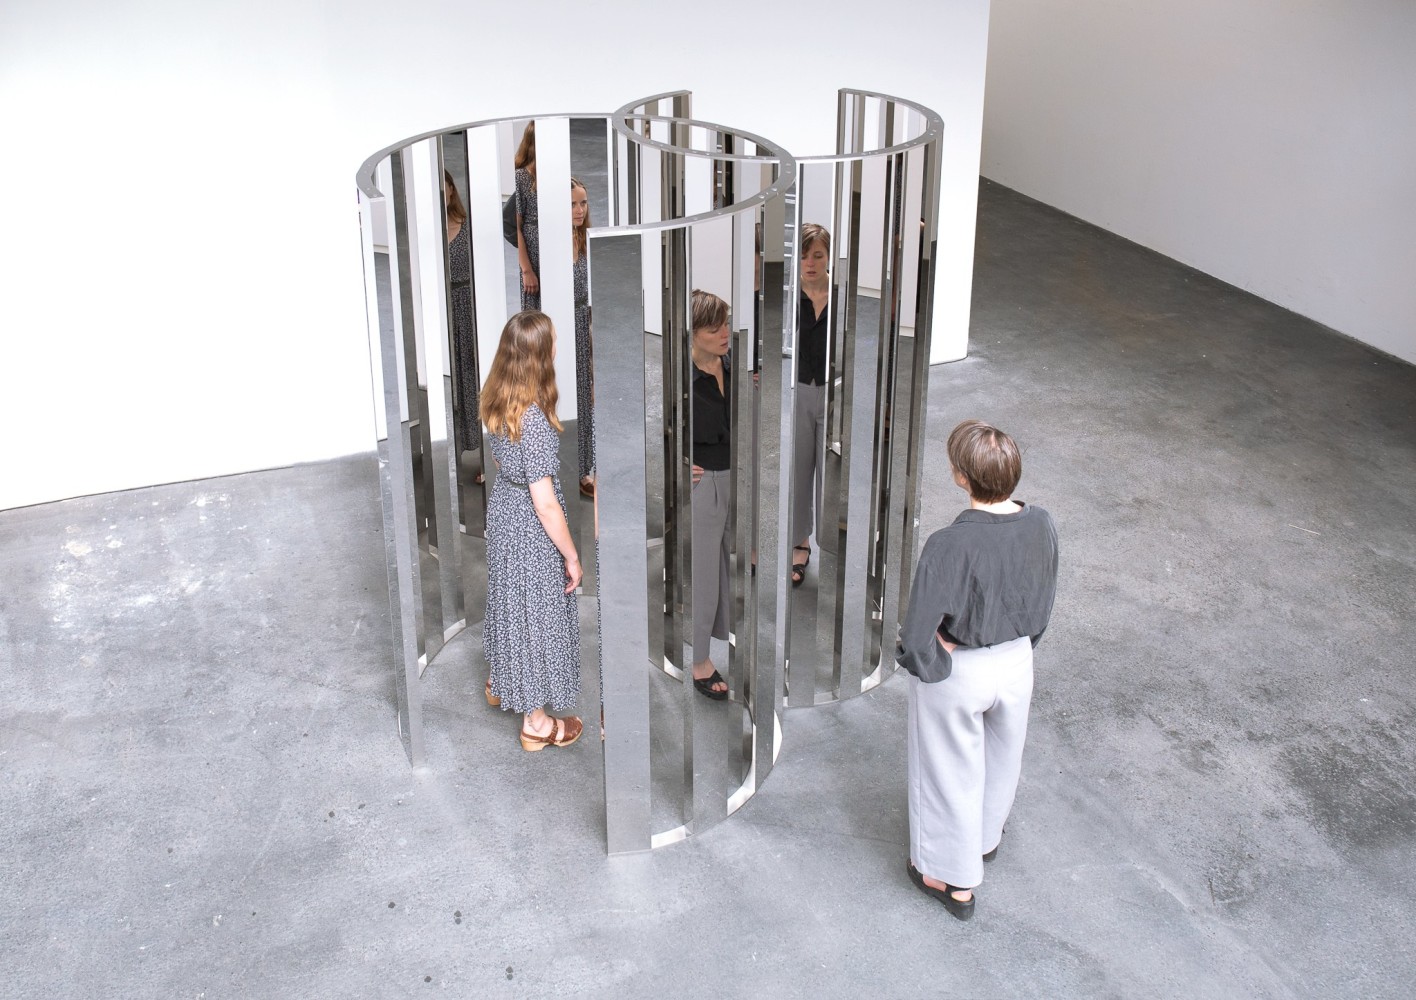 Jeppe Hein

Intersecting Circles

2019

High polished stainless steel

87 3/8 x 85 x 70 inches (222 x 216 x 178 cm)

Edition&amp;nbsp;of 3, with 2 AP

JH 525

&amp;nbsp;

INQUIRE